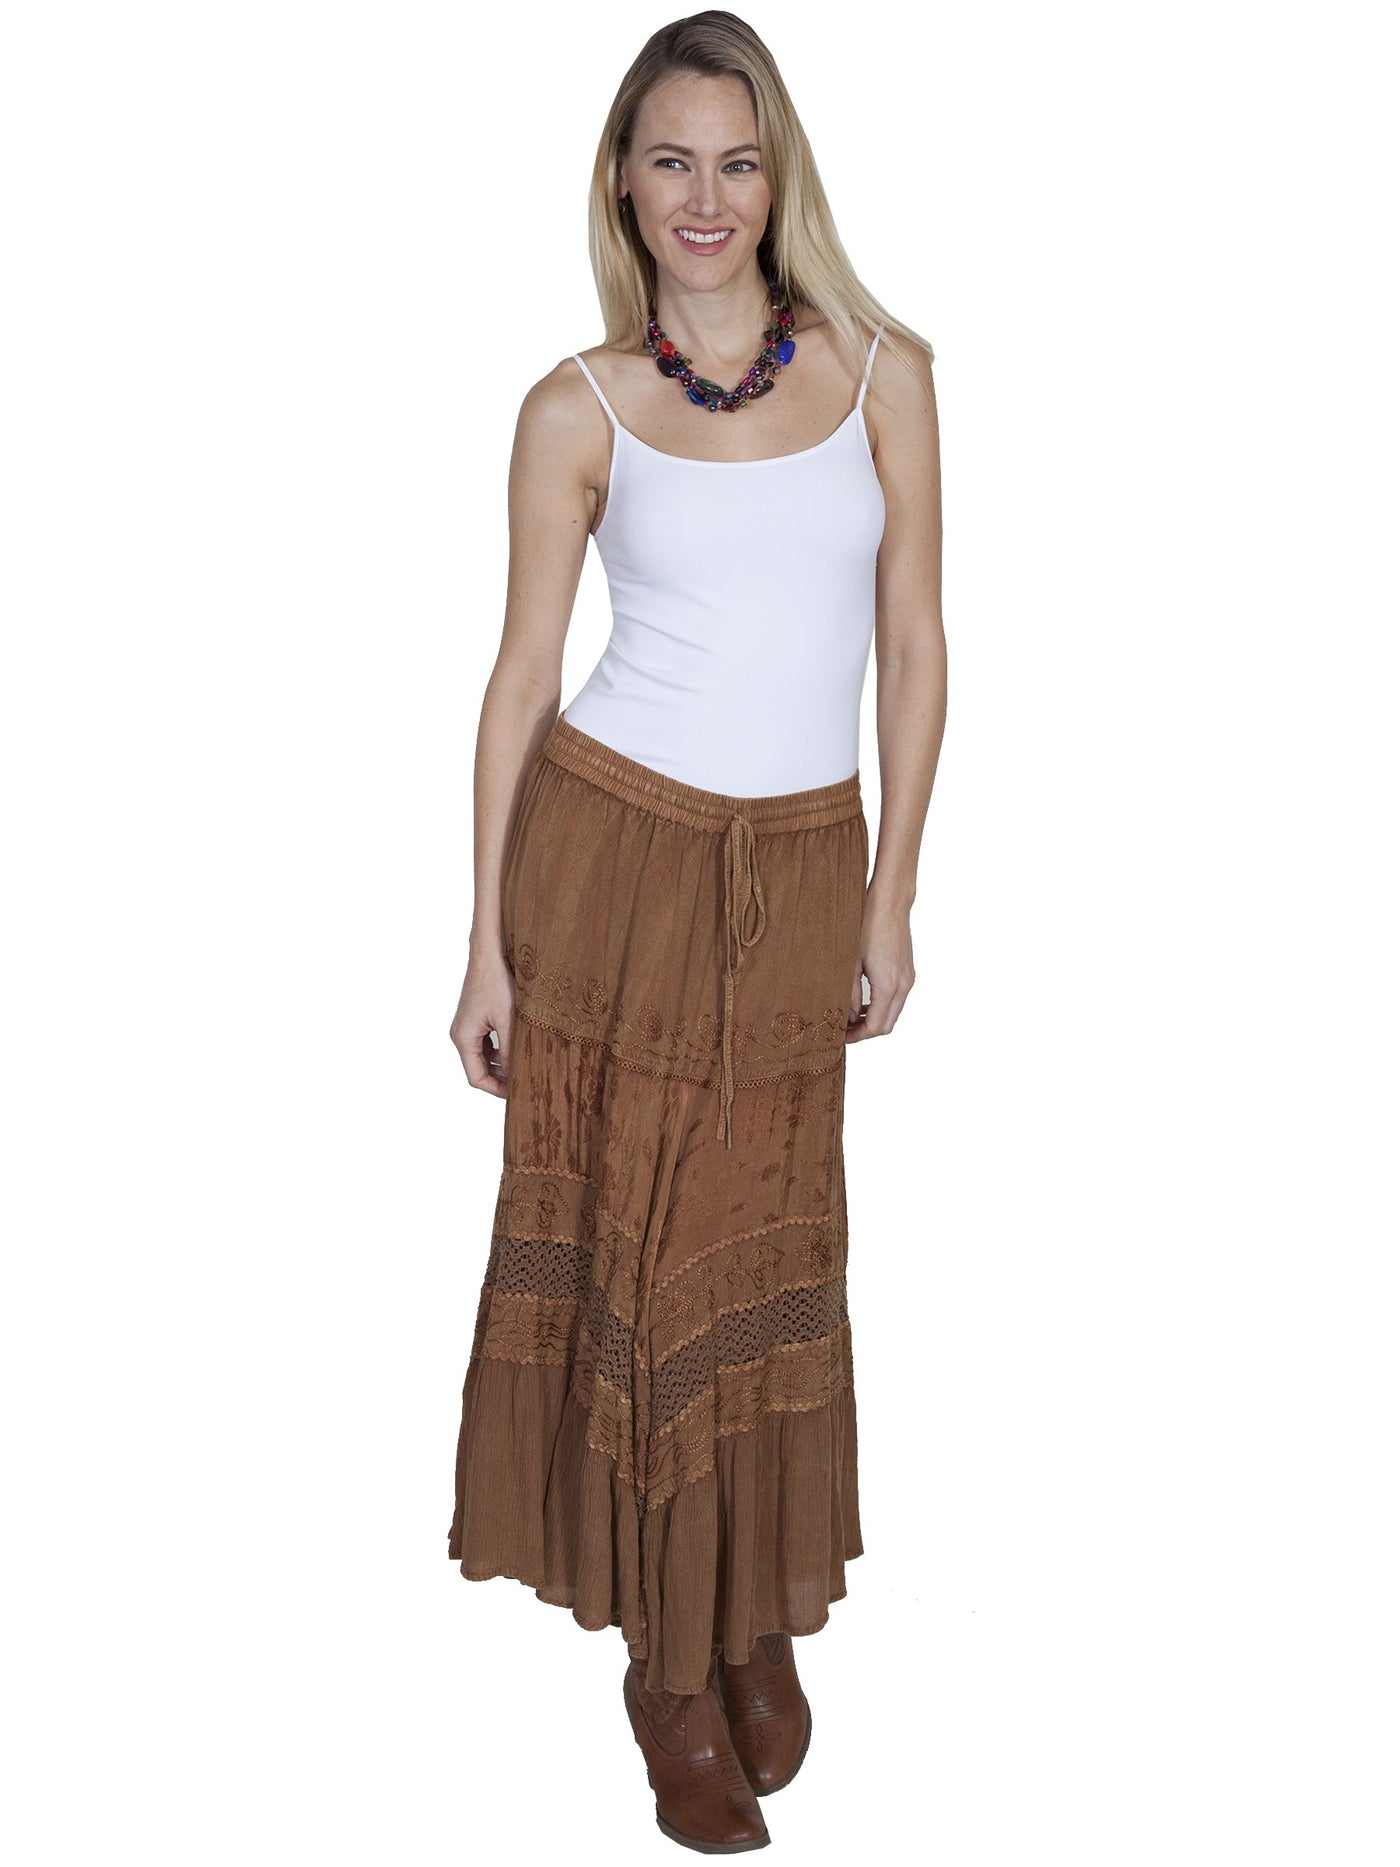 Western Style Full Length Embroidered Skirt in Beige - SOLD OUT